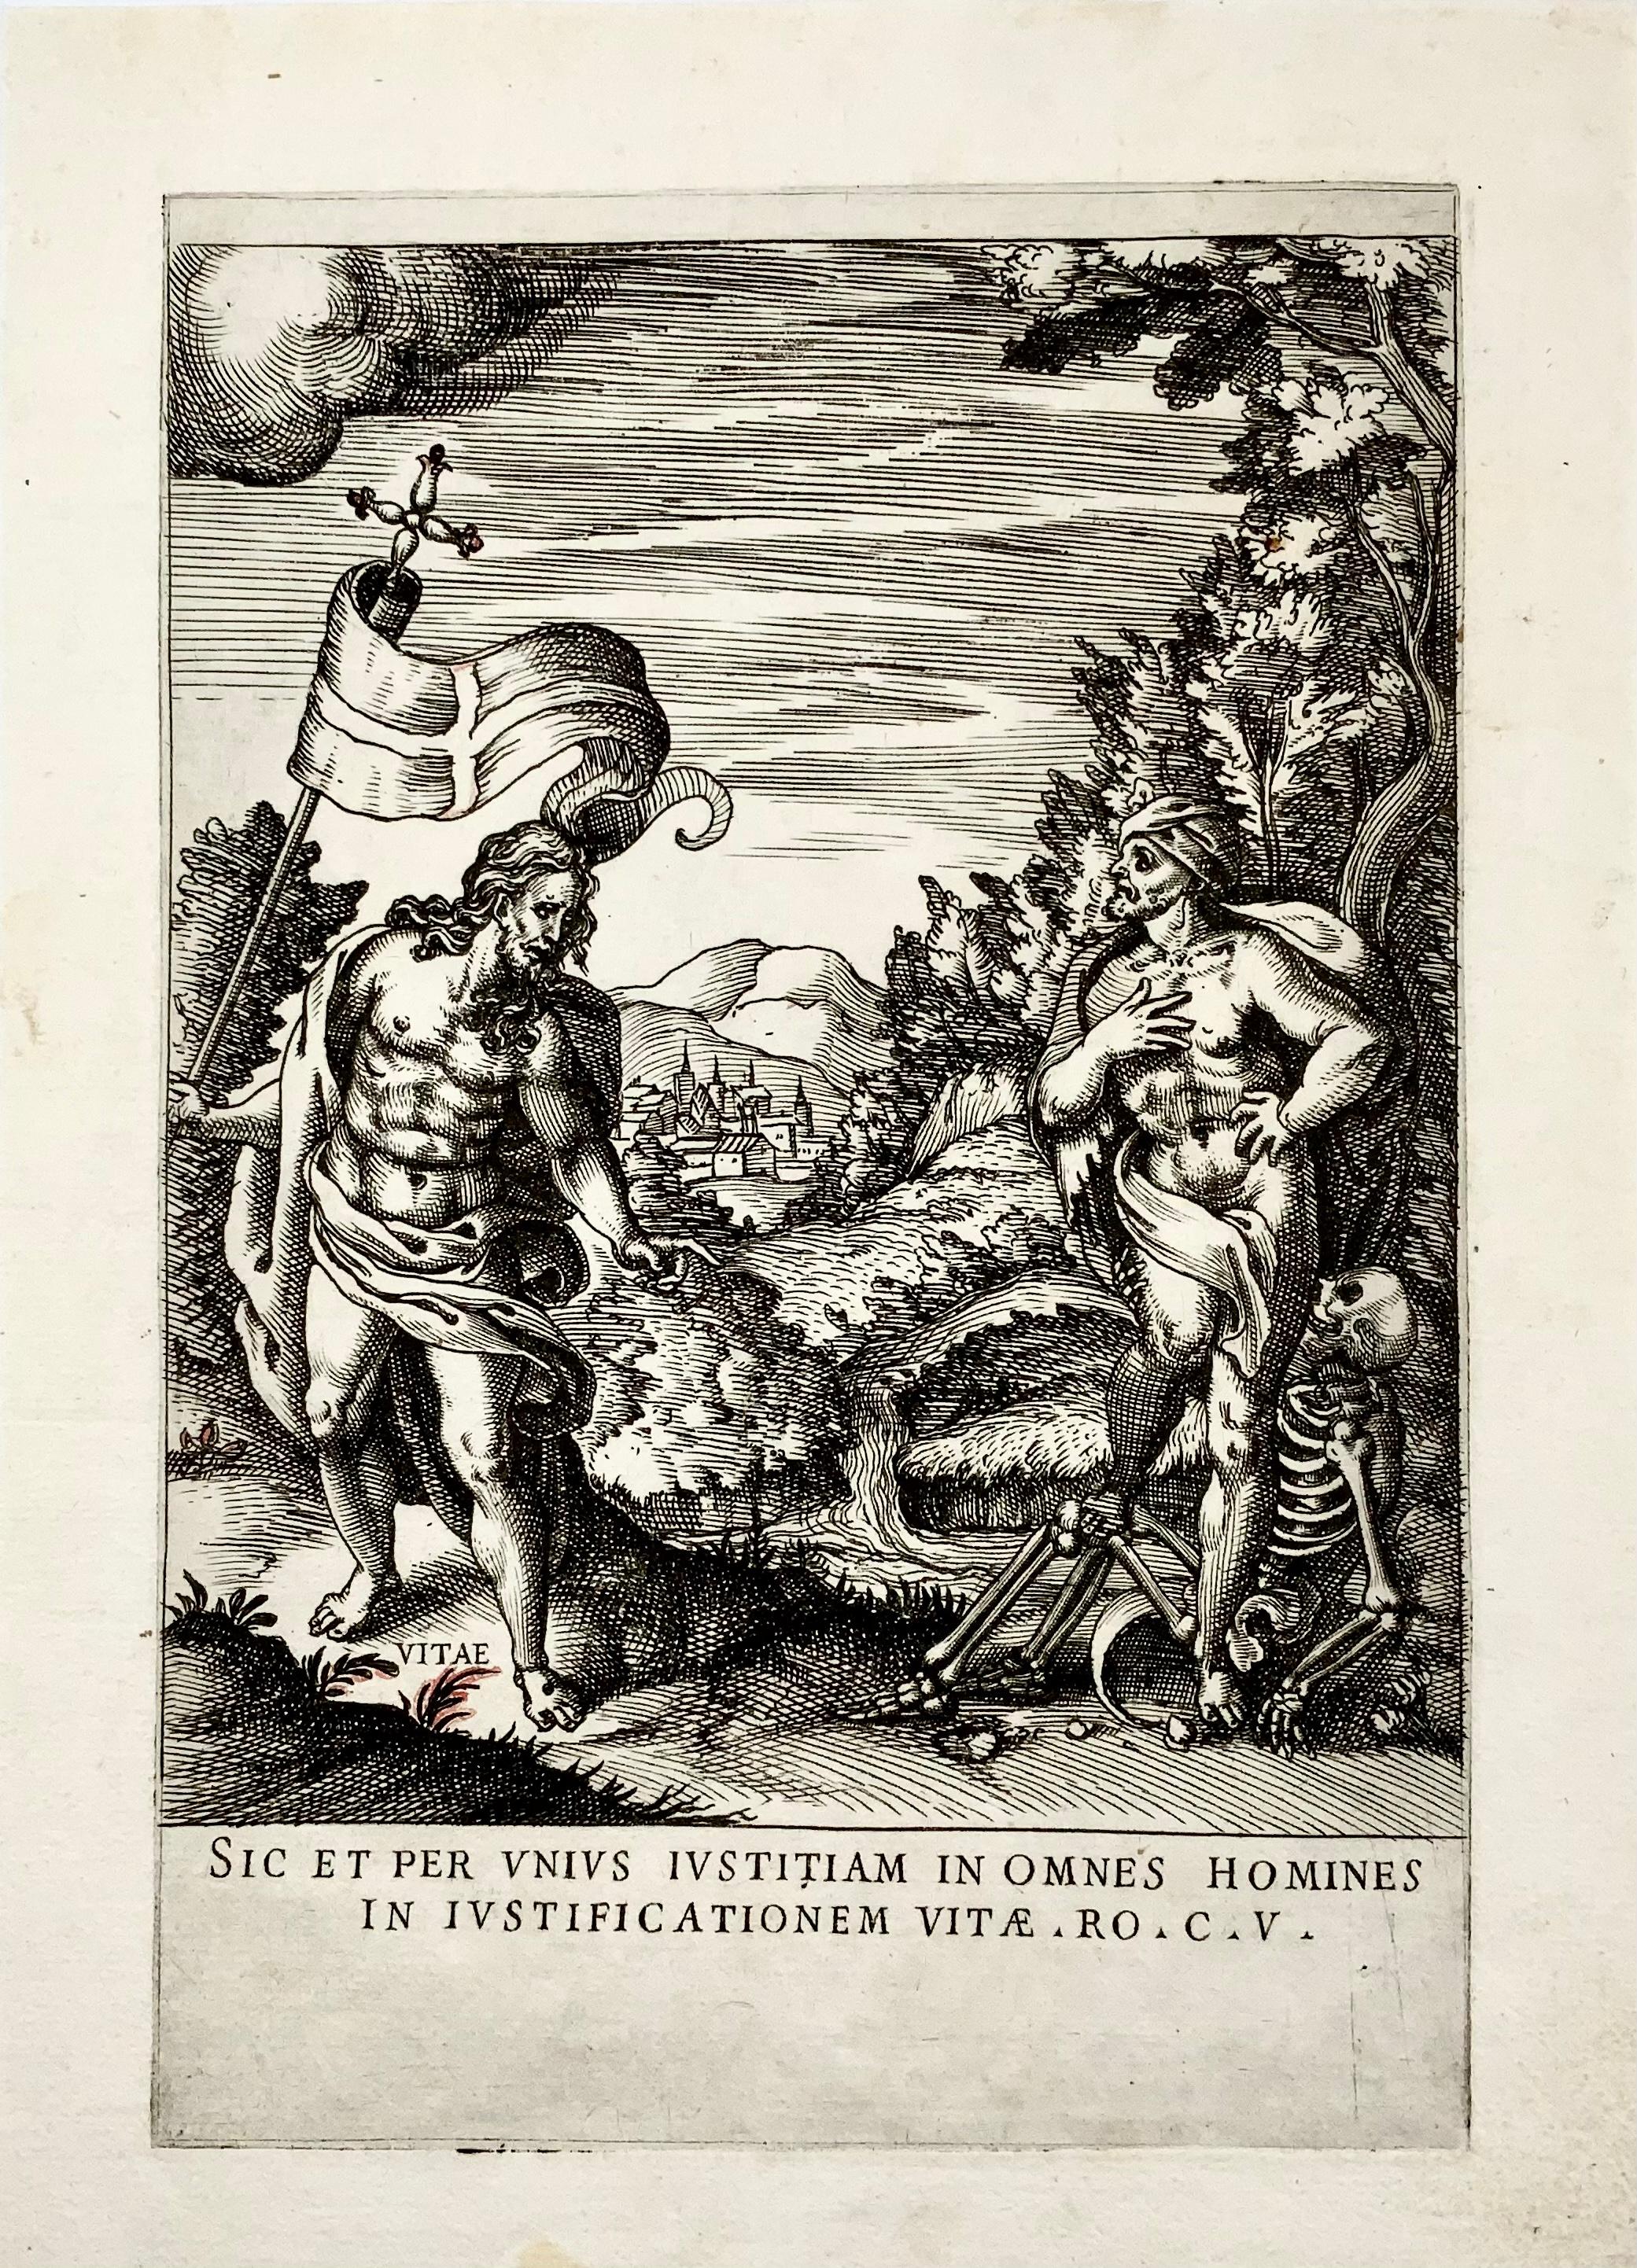 This extremely rare engraving was produced by Cavalieri as an extraneous allegorical unnumbered plate in the second edition of Cirgignani’s Ecclesiae militantis triumphi; sive, Deo amabilium martyrum gloriosa pro Christi fide certamina.

Title